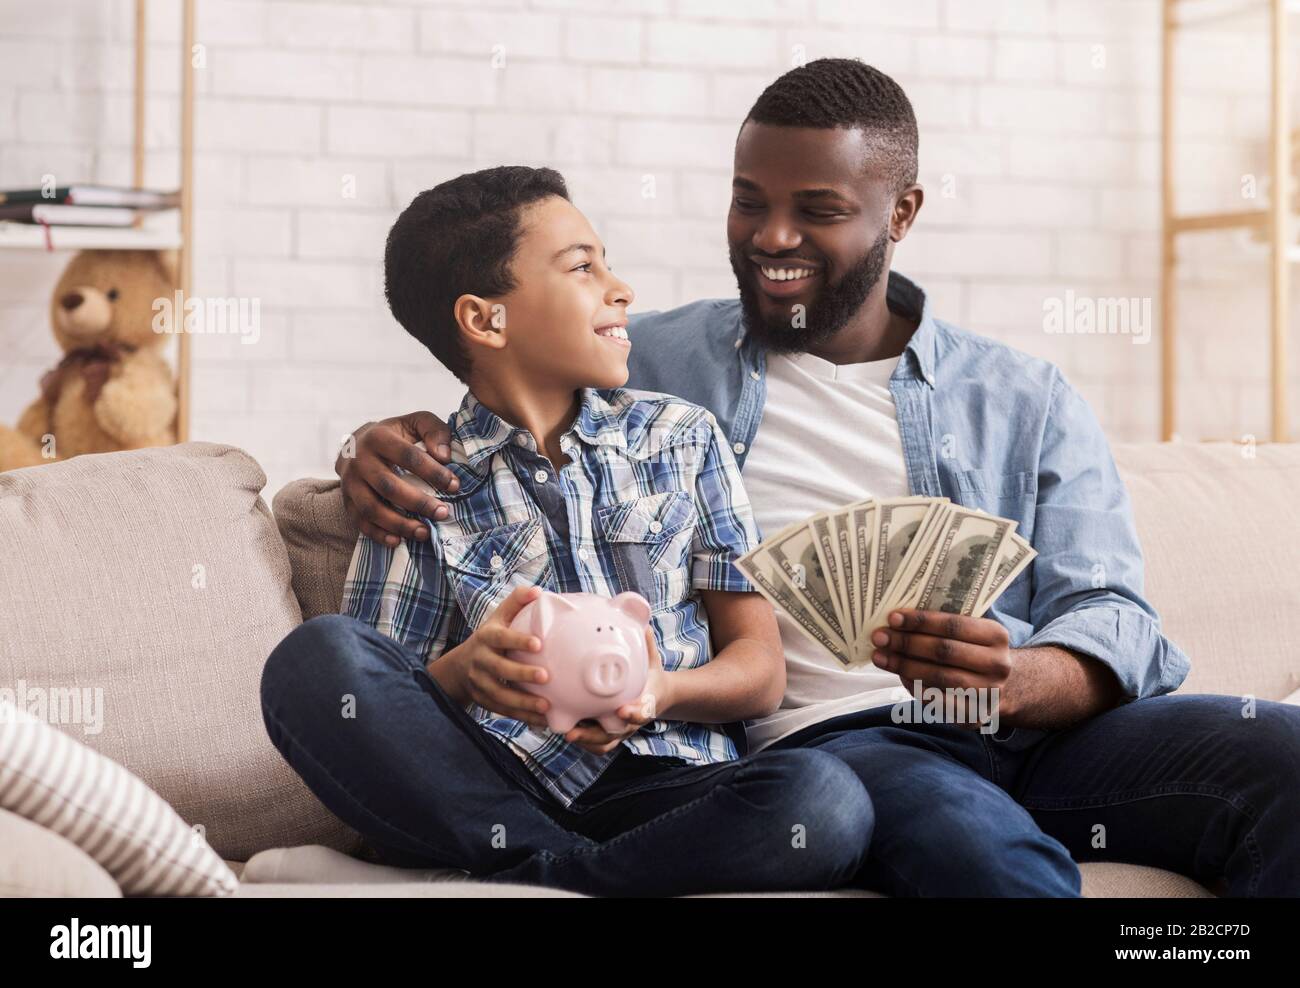 Father And Son Sitting On Couch With Cash And Piggy Bank Stock Photo